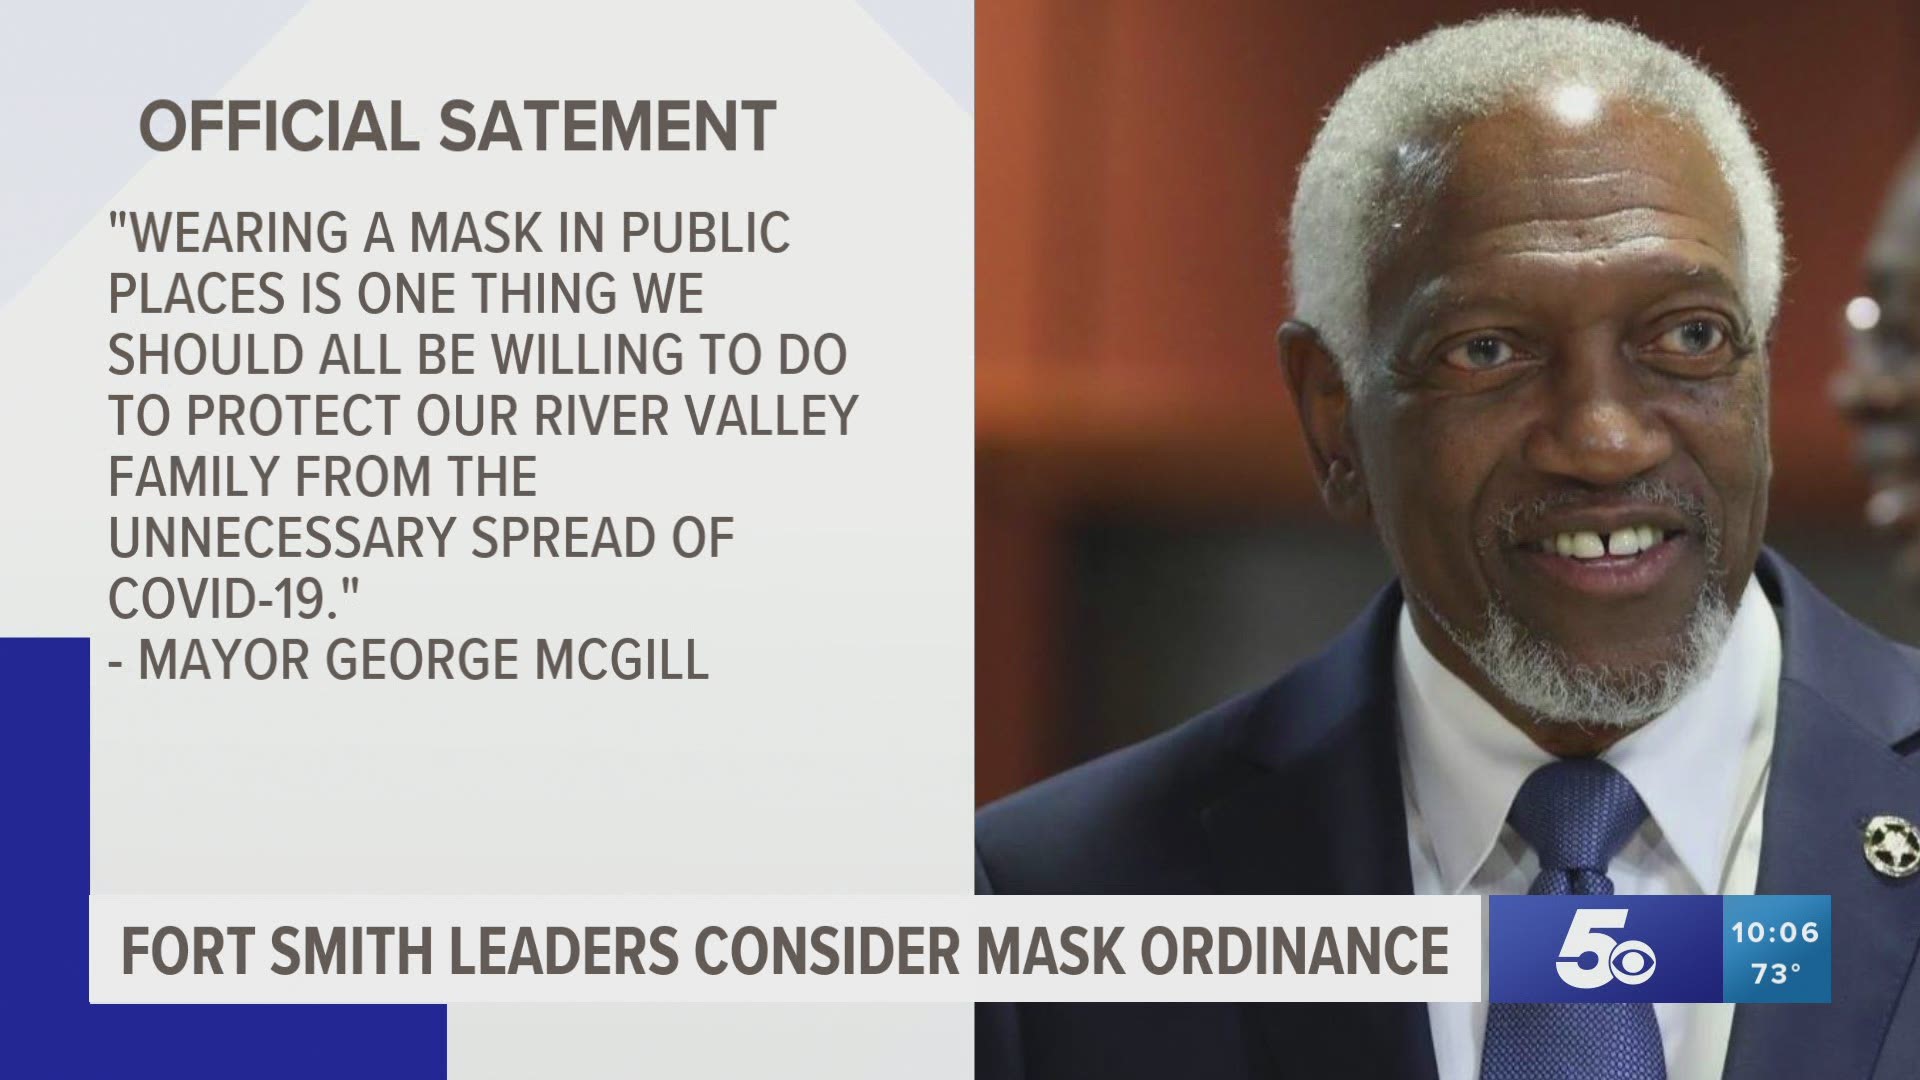 Fort Smith leaders consider mask ordinance.